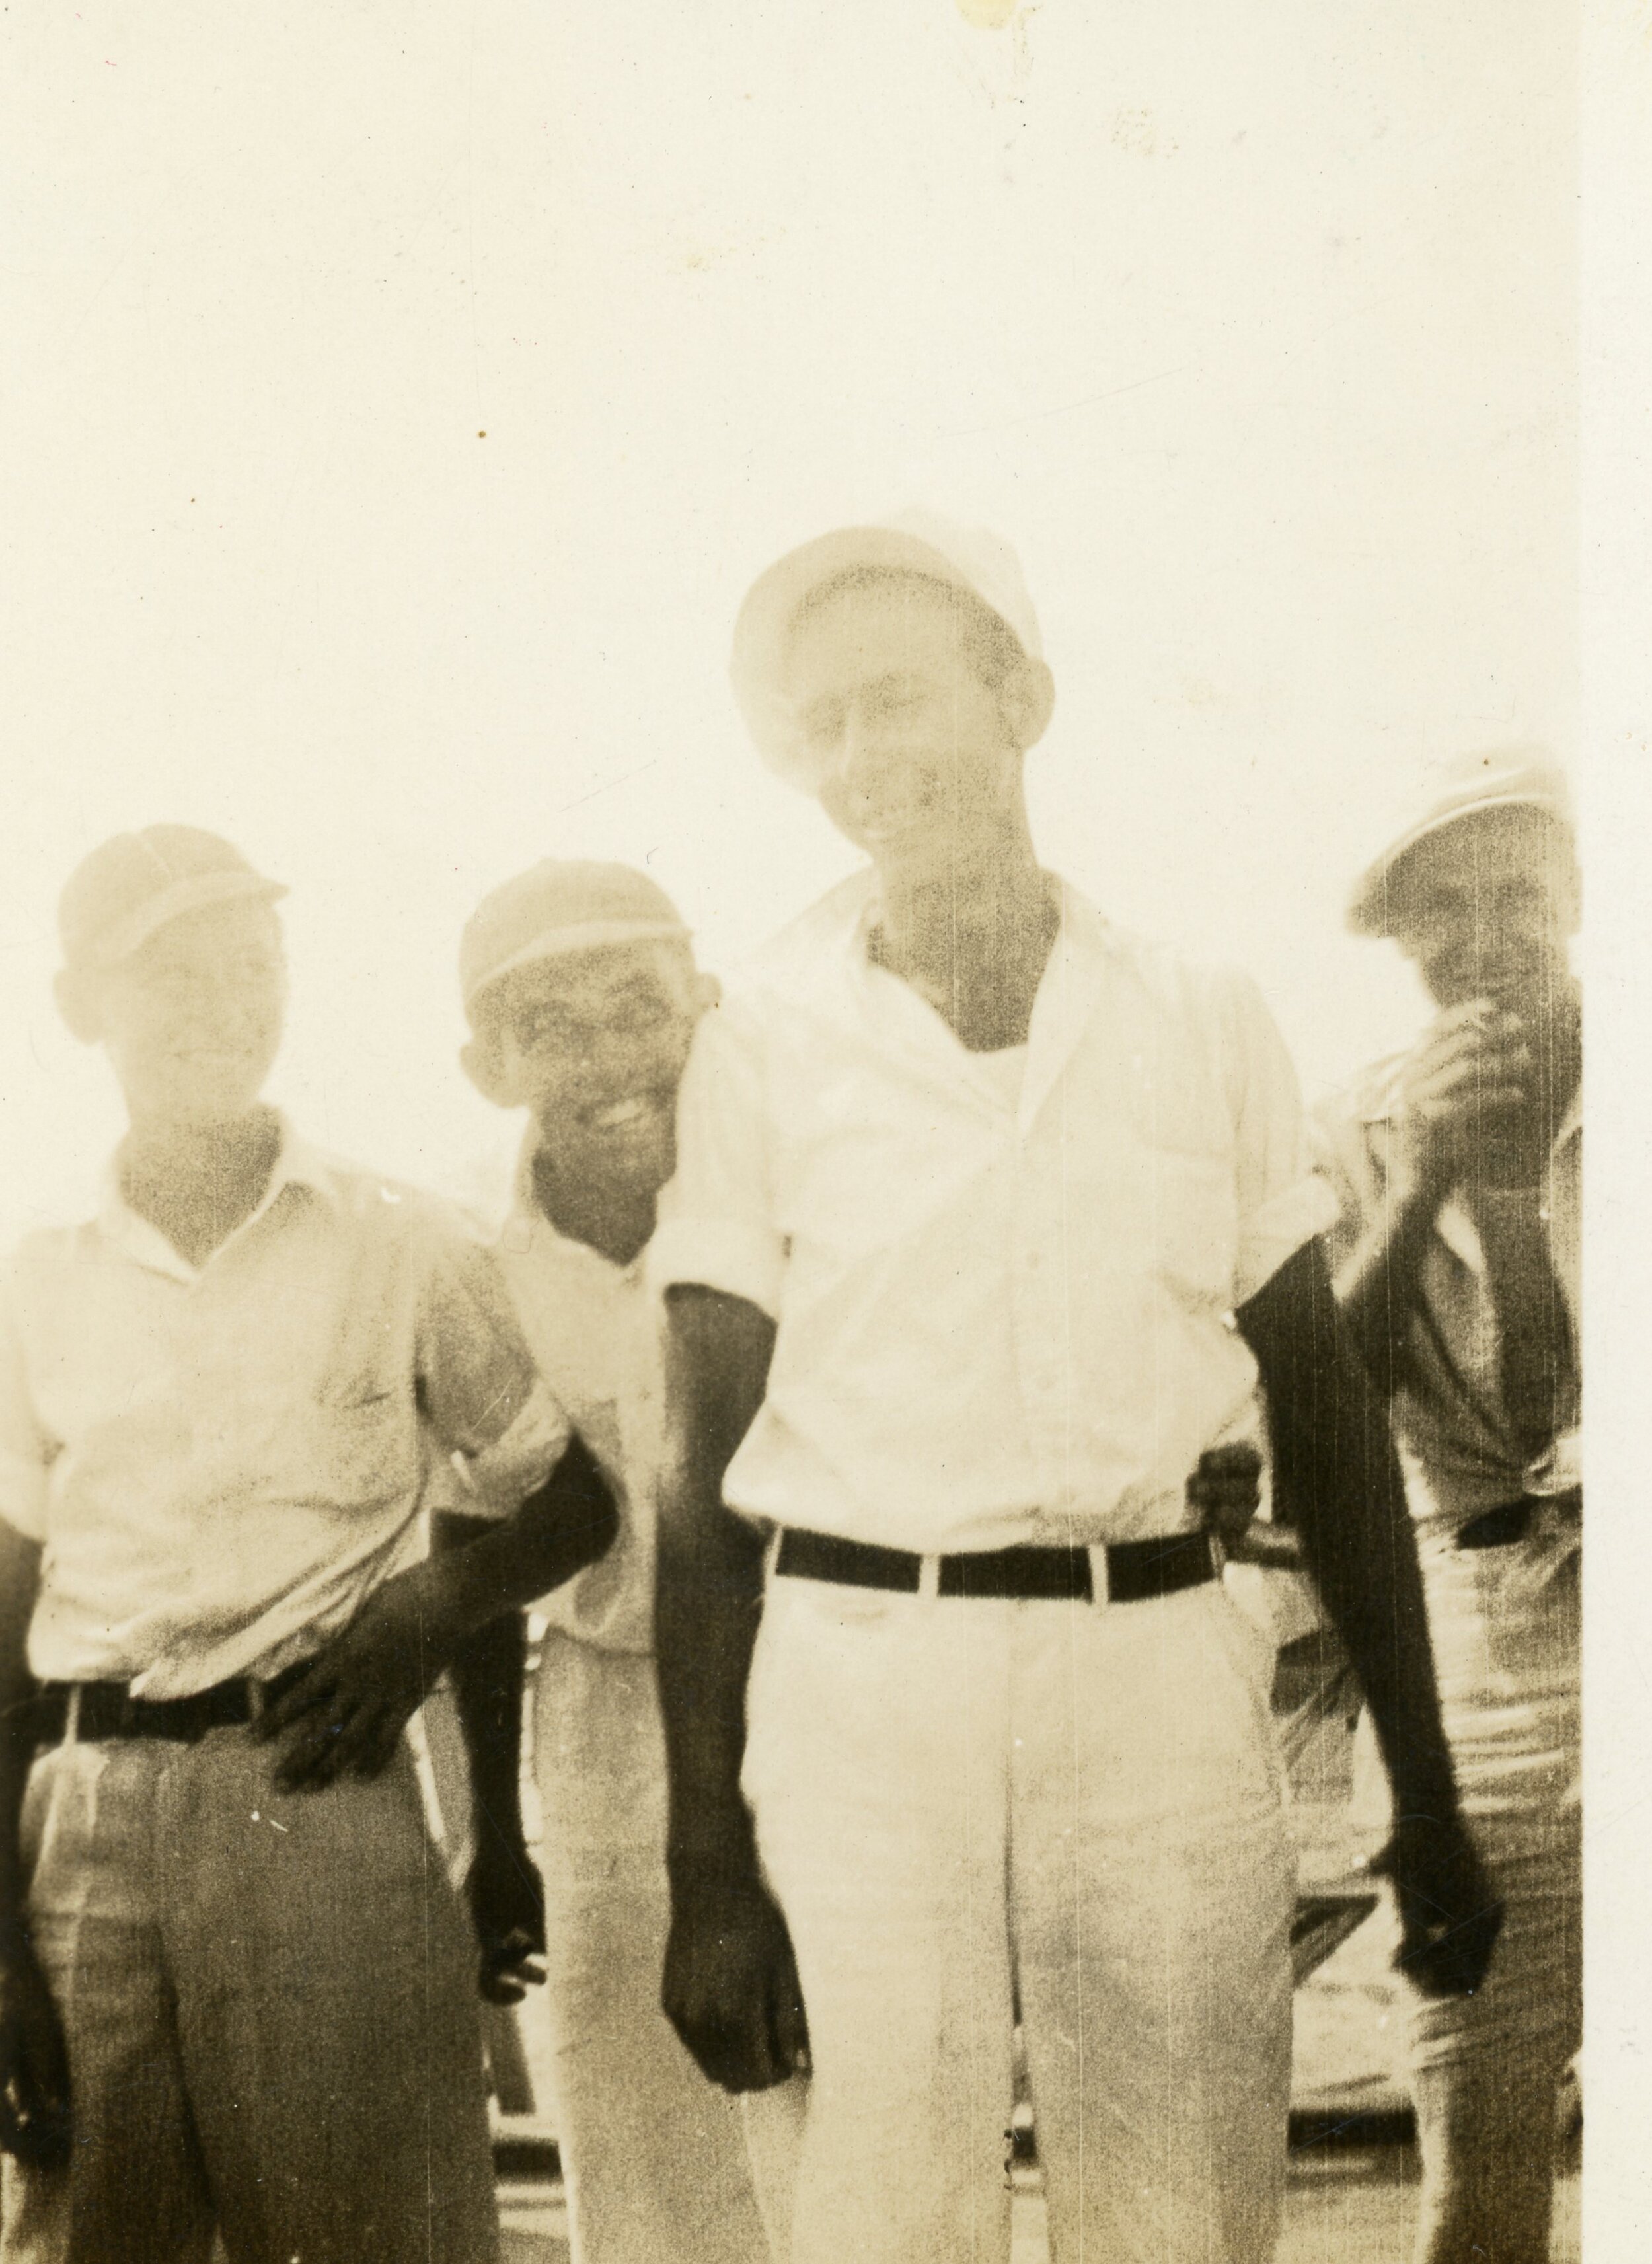 L-R: Guy Gaskill, Gerald Whitehurst, Vincent Pigott, and Ralph Chadwick 1934 at Cape Lookout